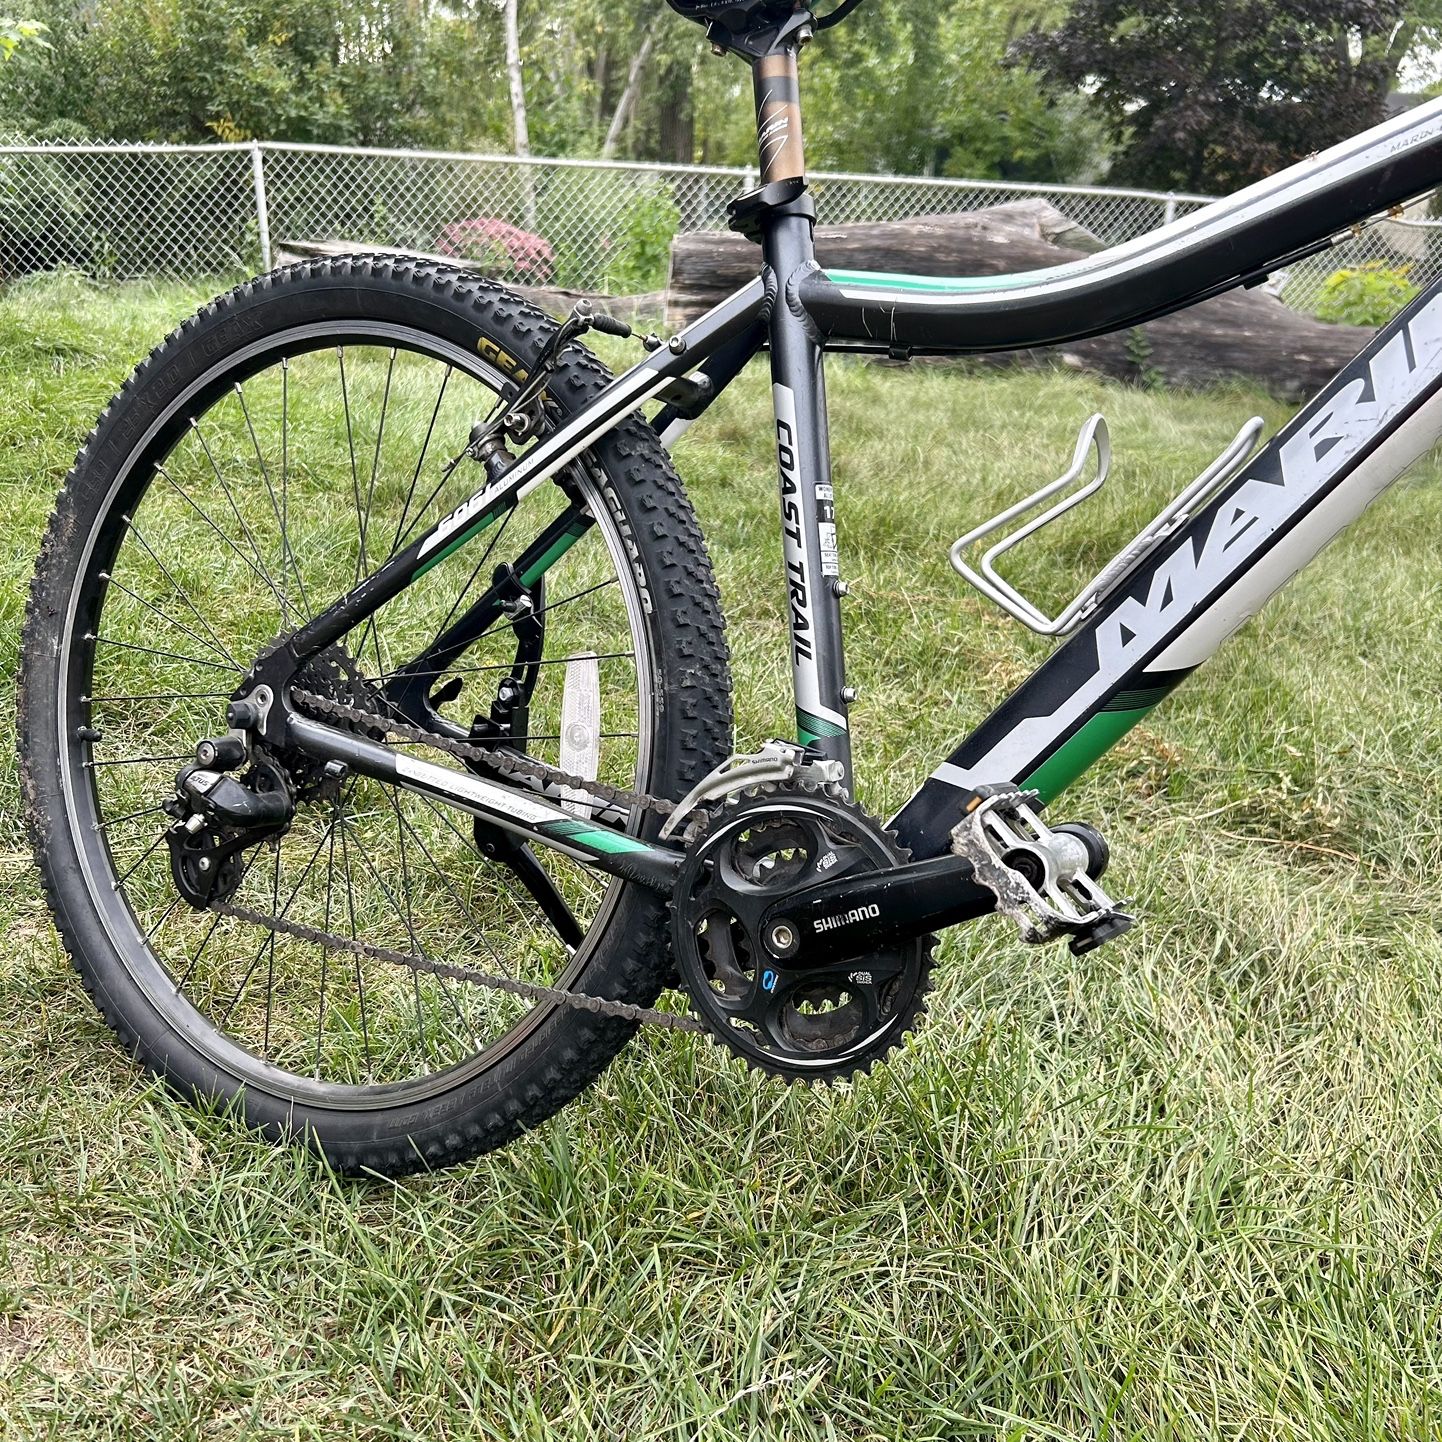 Marine 26” Mountain Bike. Bicycle In Great Condition And Ready For Use! Aluminum.